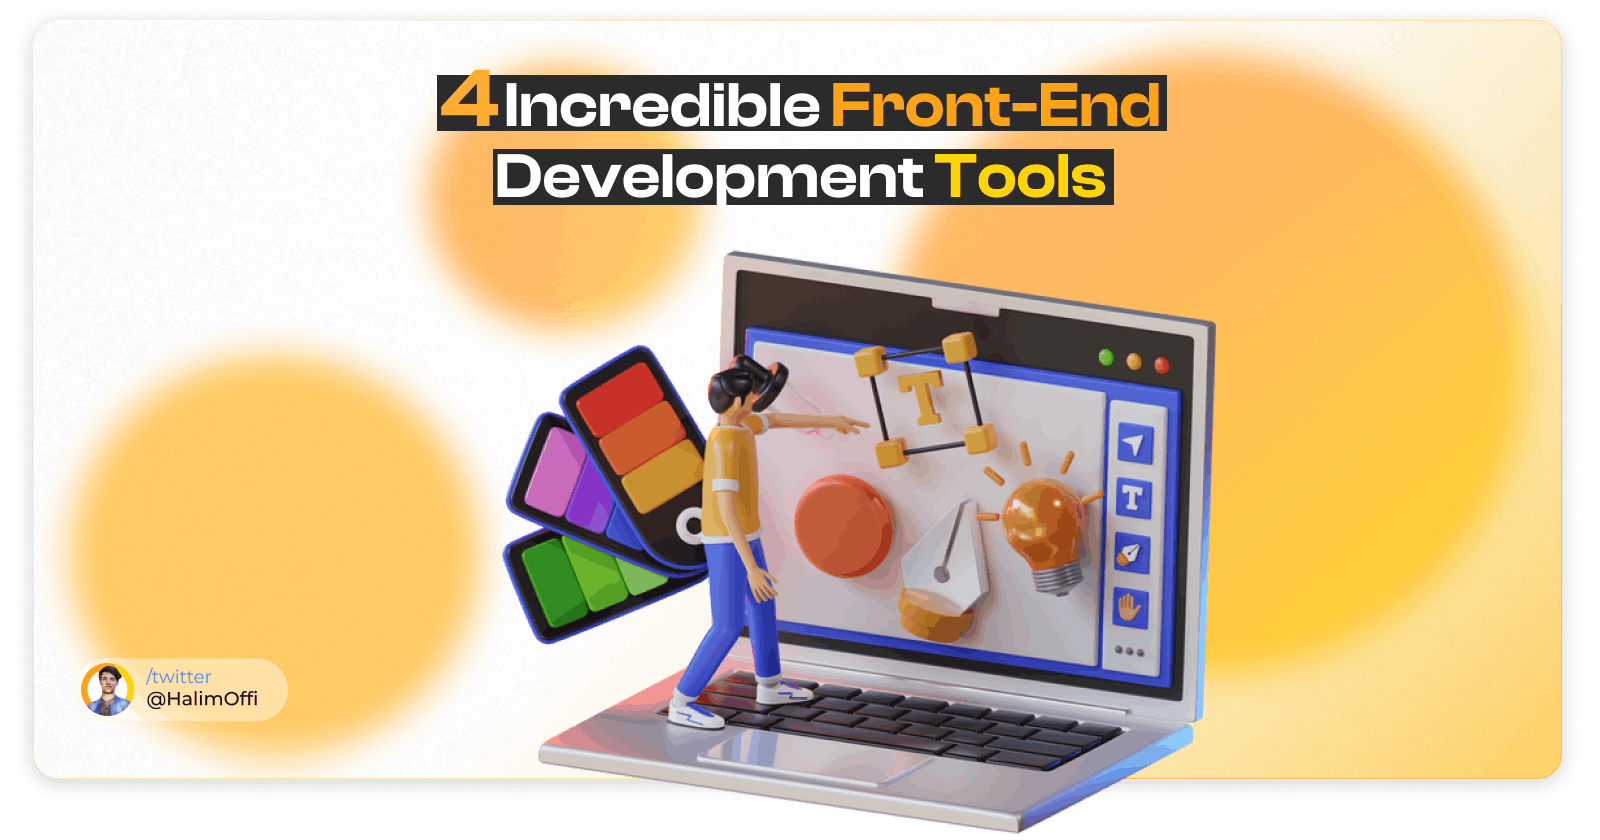 4 Incredible Front-End Development Tools That You Should Know